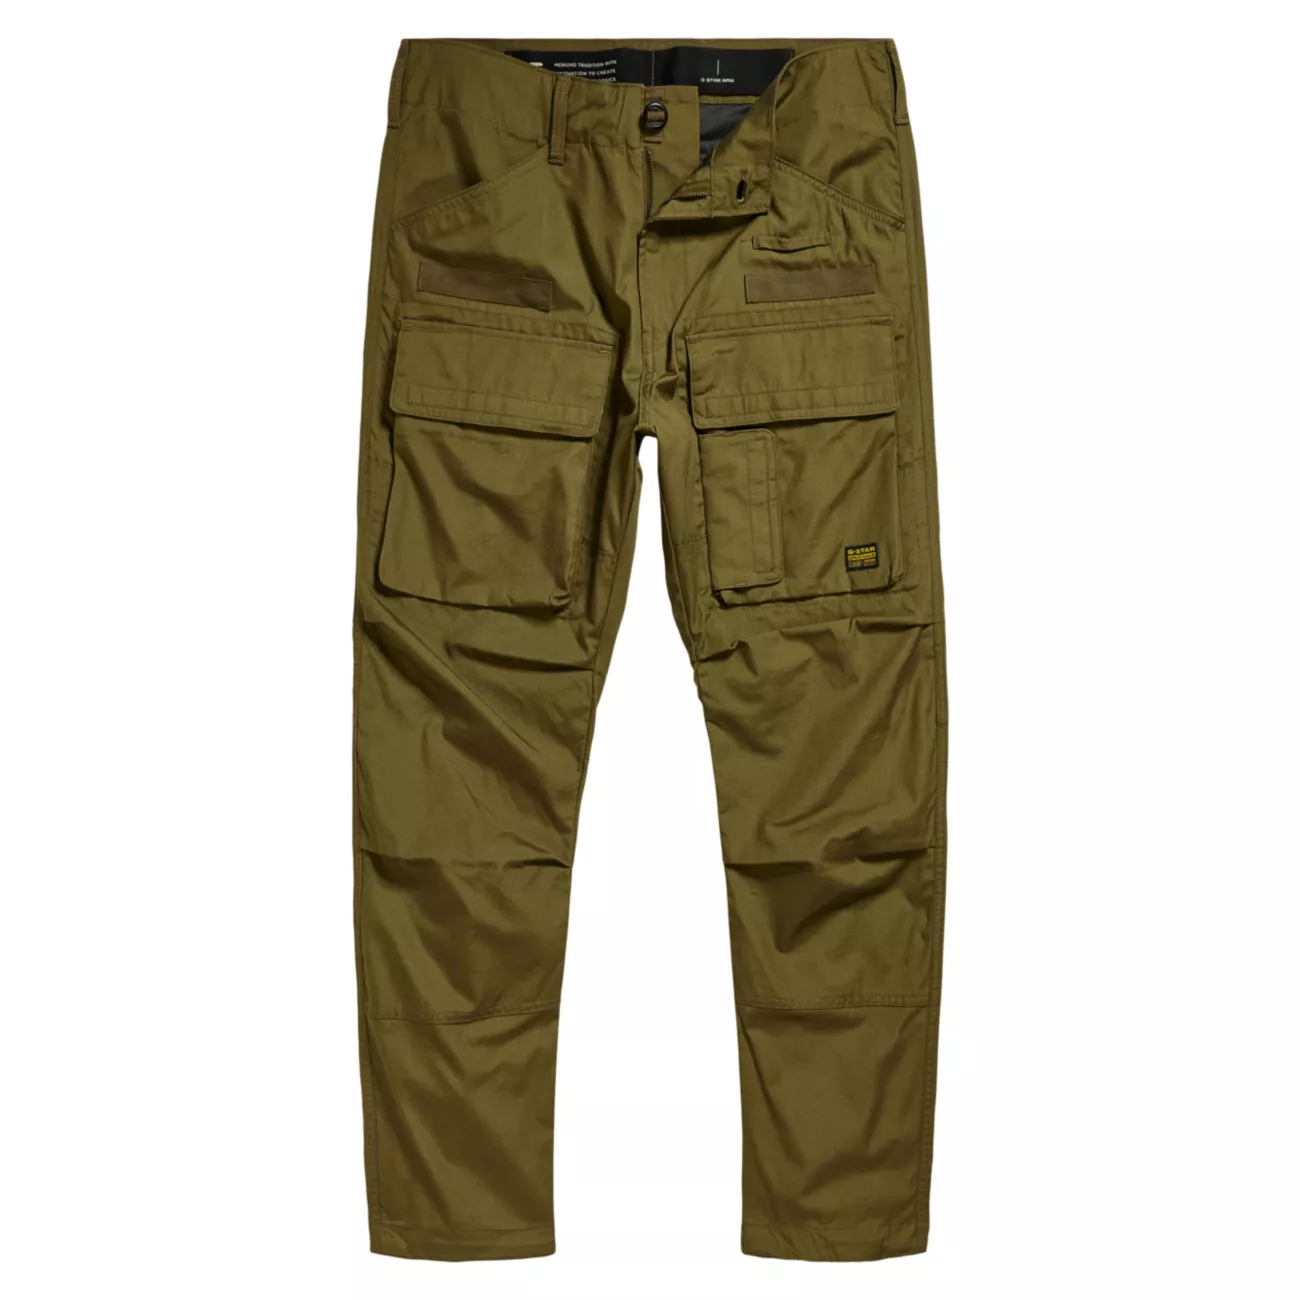 3D Tapered Cargo Pants G-STAR RAW